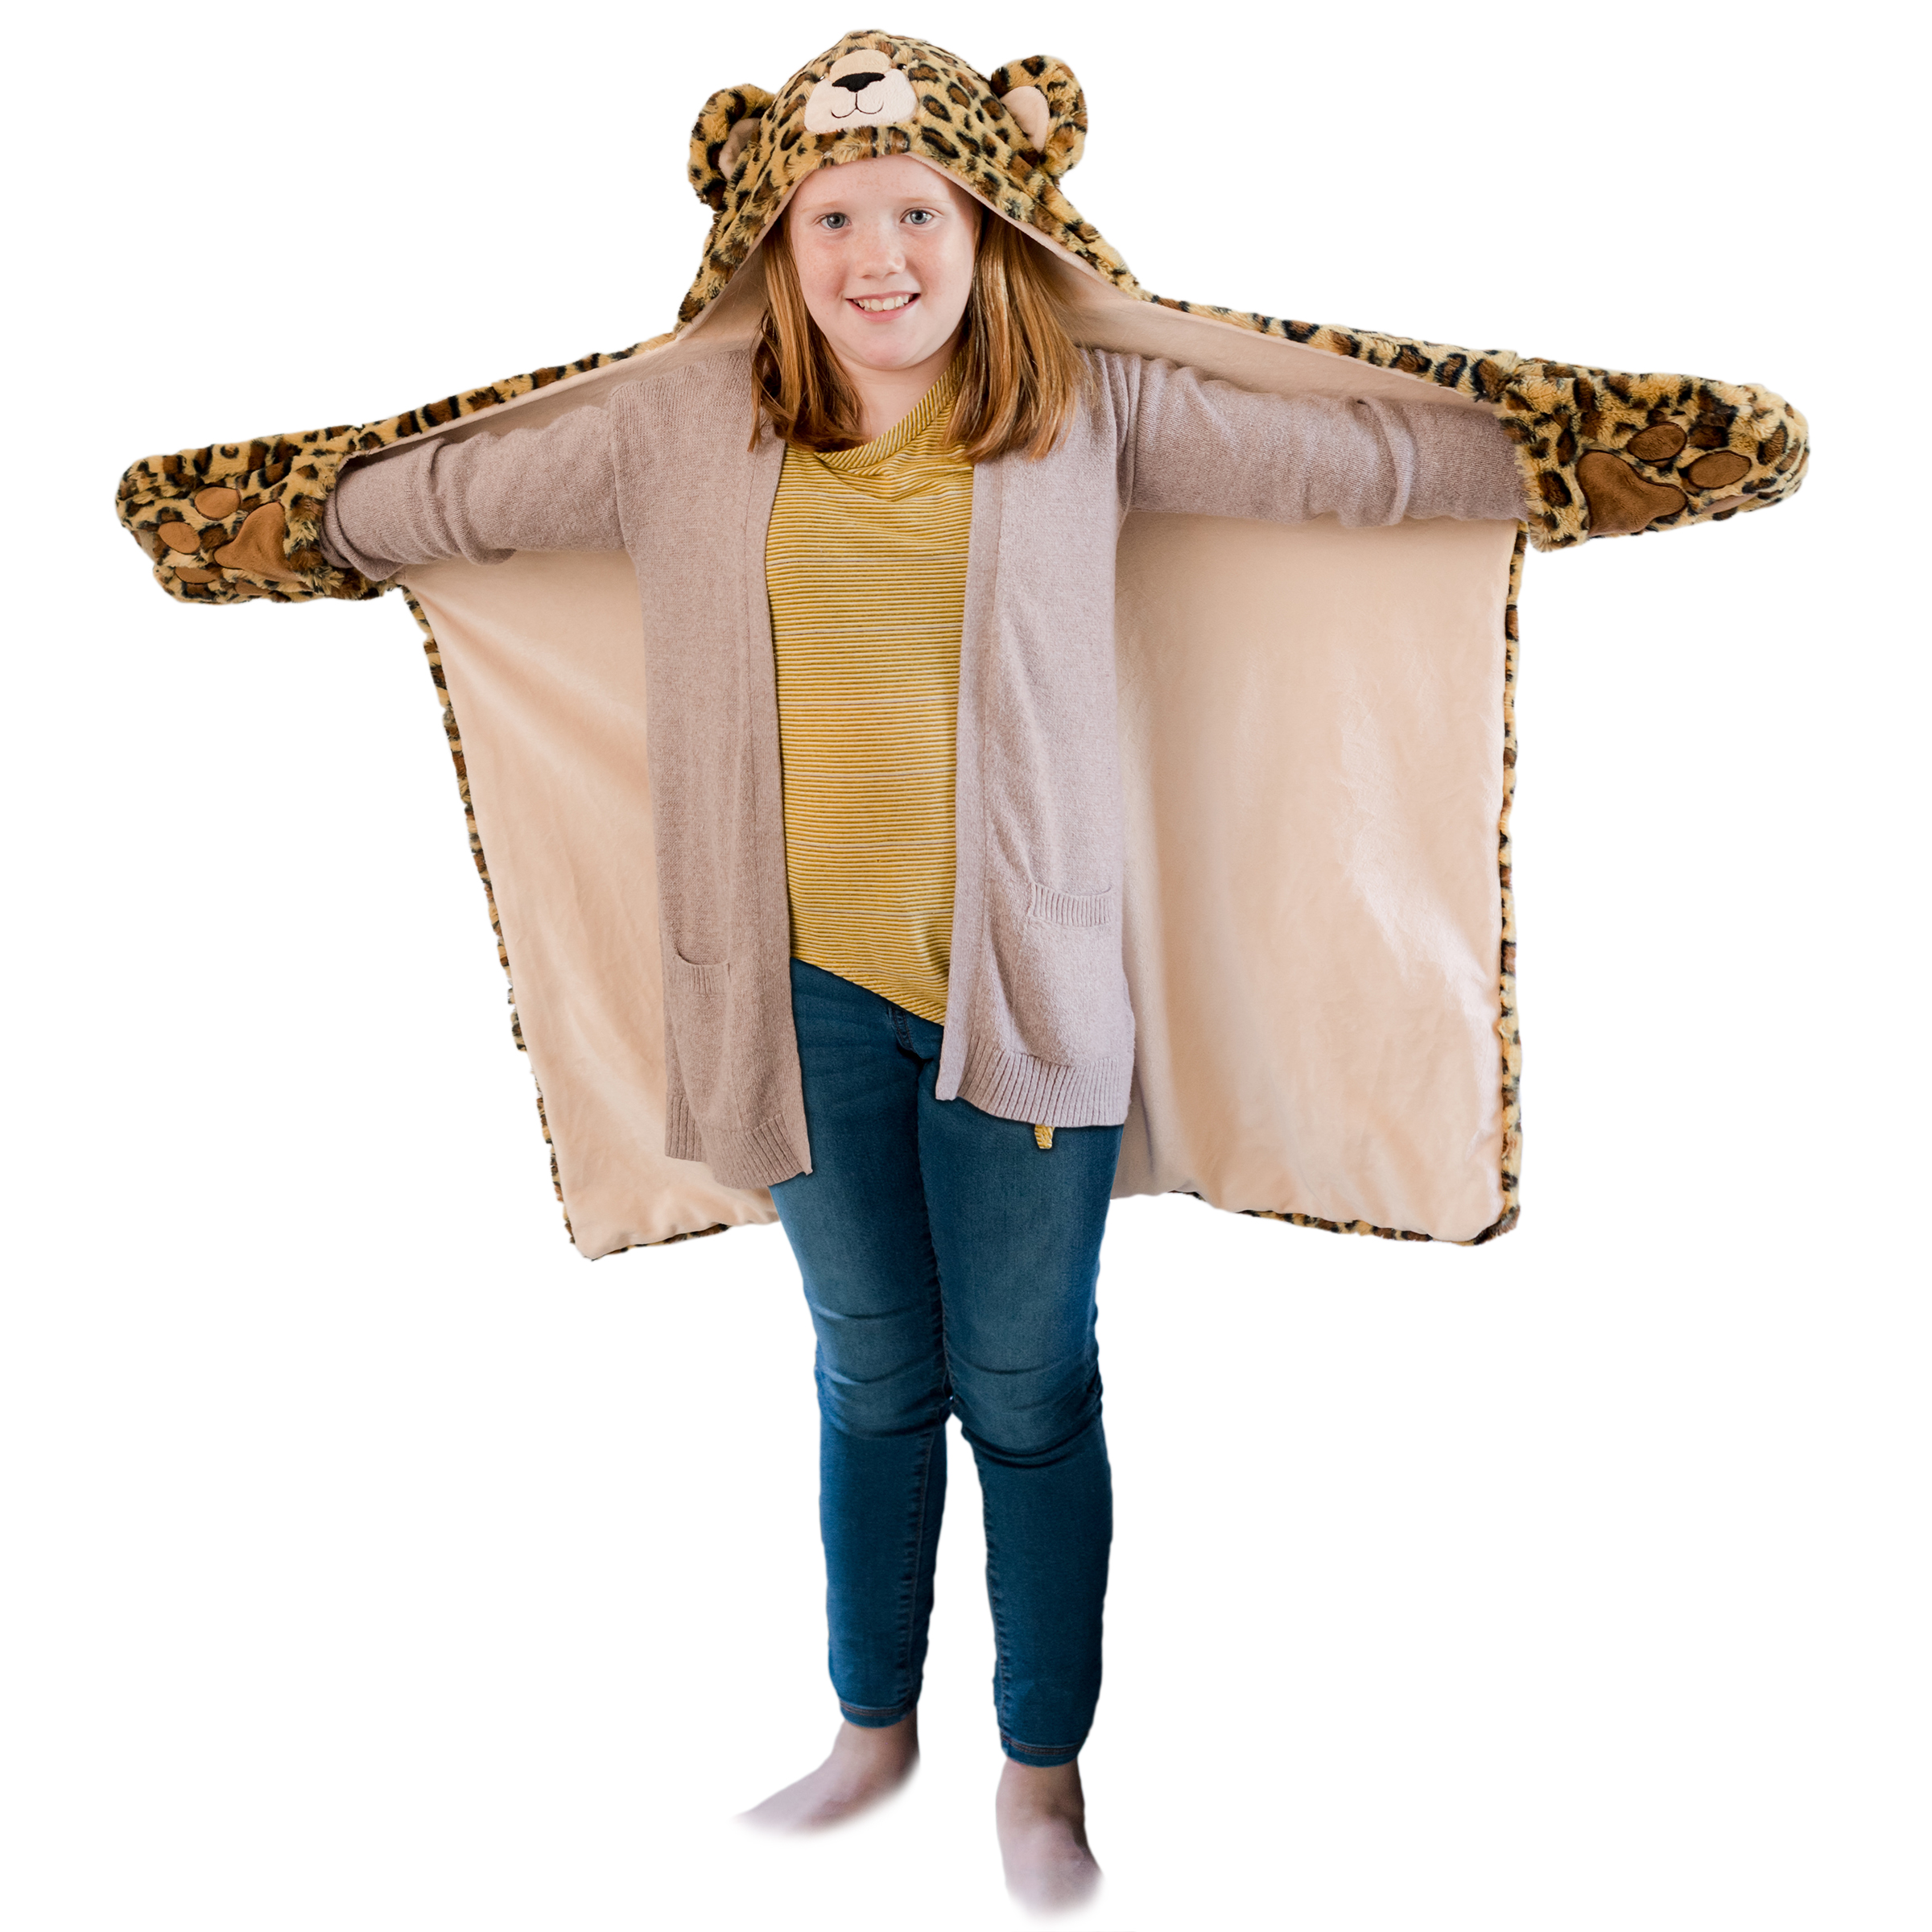 Animal Adventure Wild for Style™ 2-in-1 Transformable Cape 10" Leopard Plush Toy - image 1 of 7